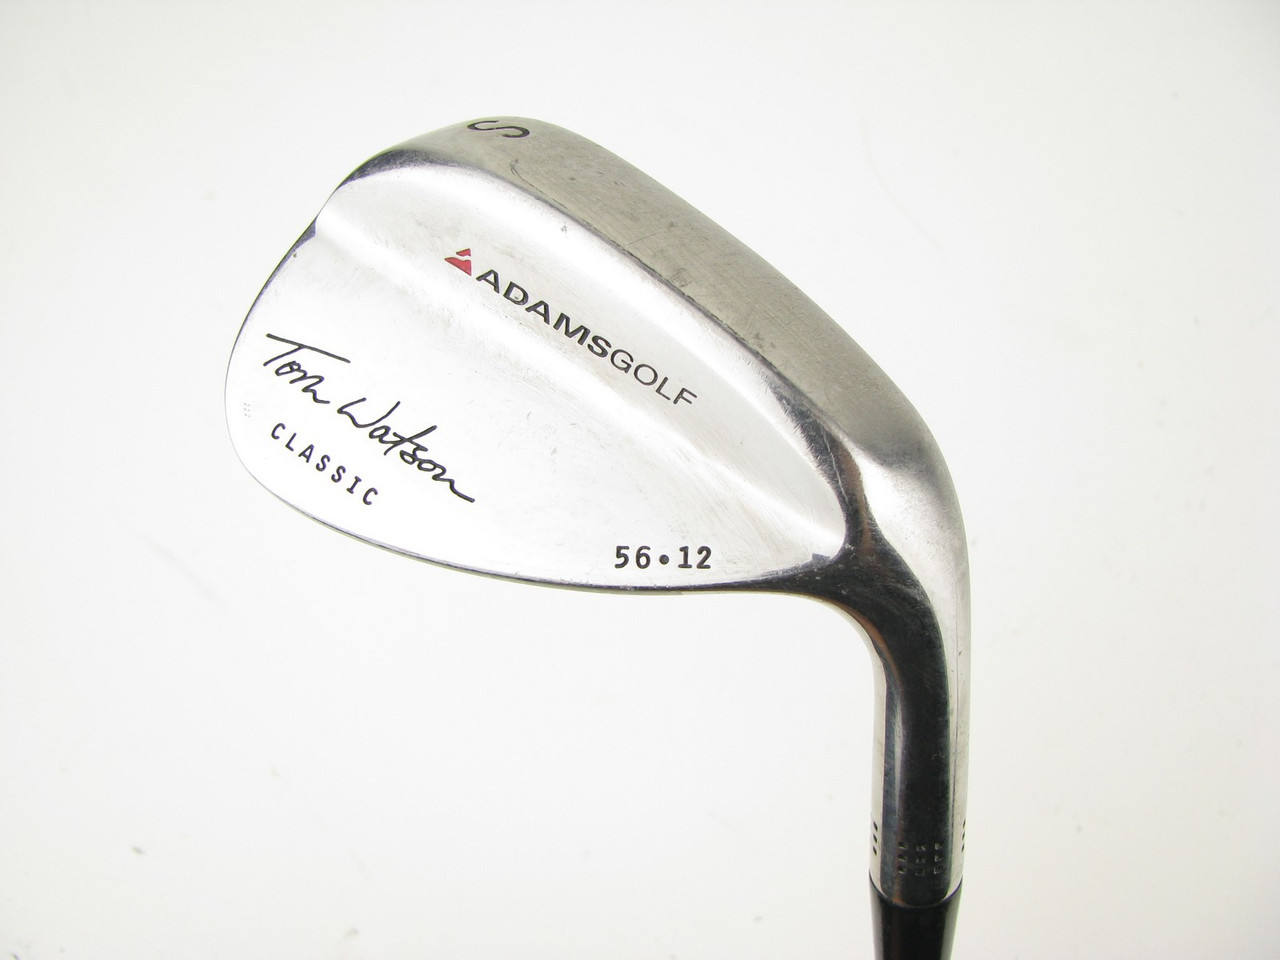 Adams Tom Watson Classic Sand Wedge 56 degree 56-12 w/ Steel (Out of Stock)  - Clubs n Covers Golf